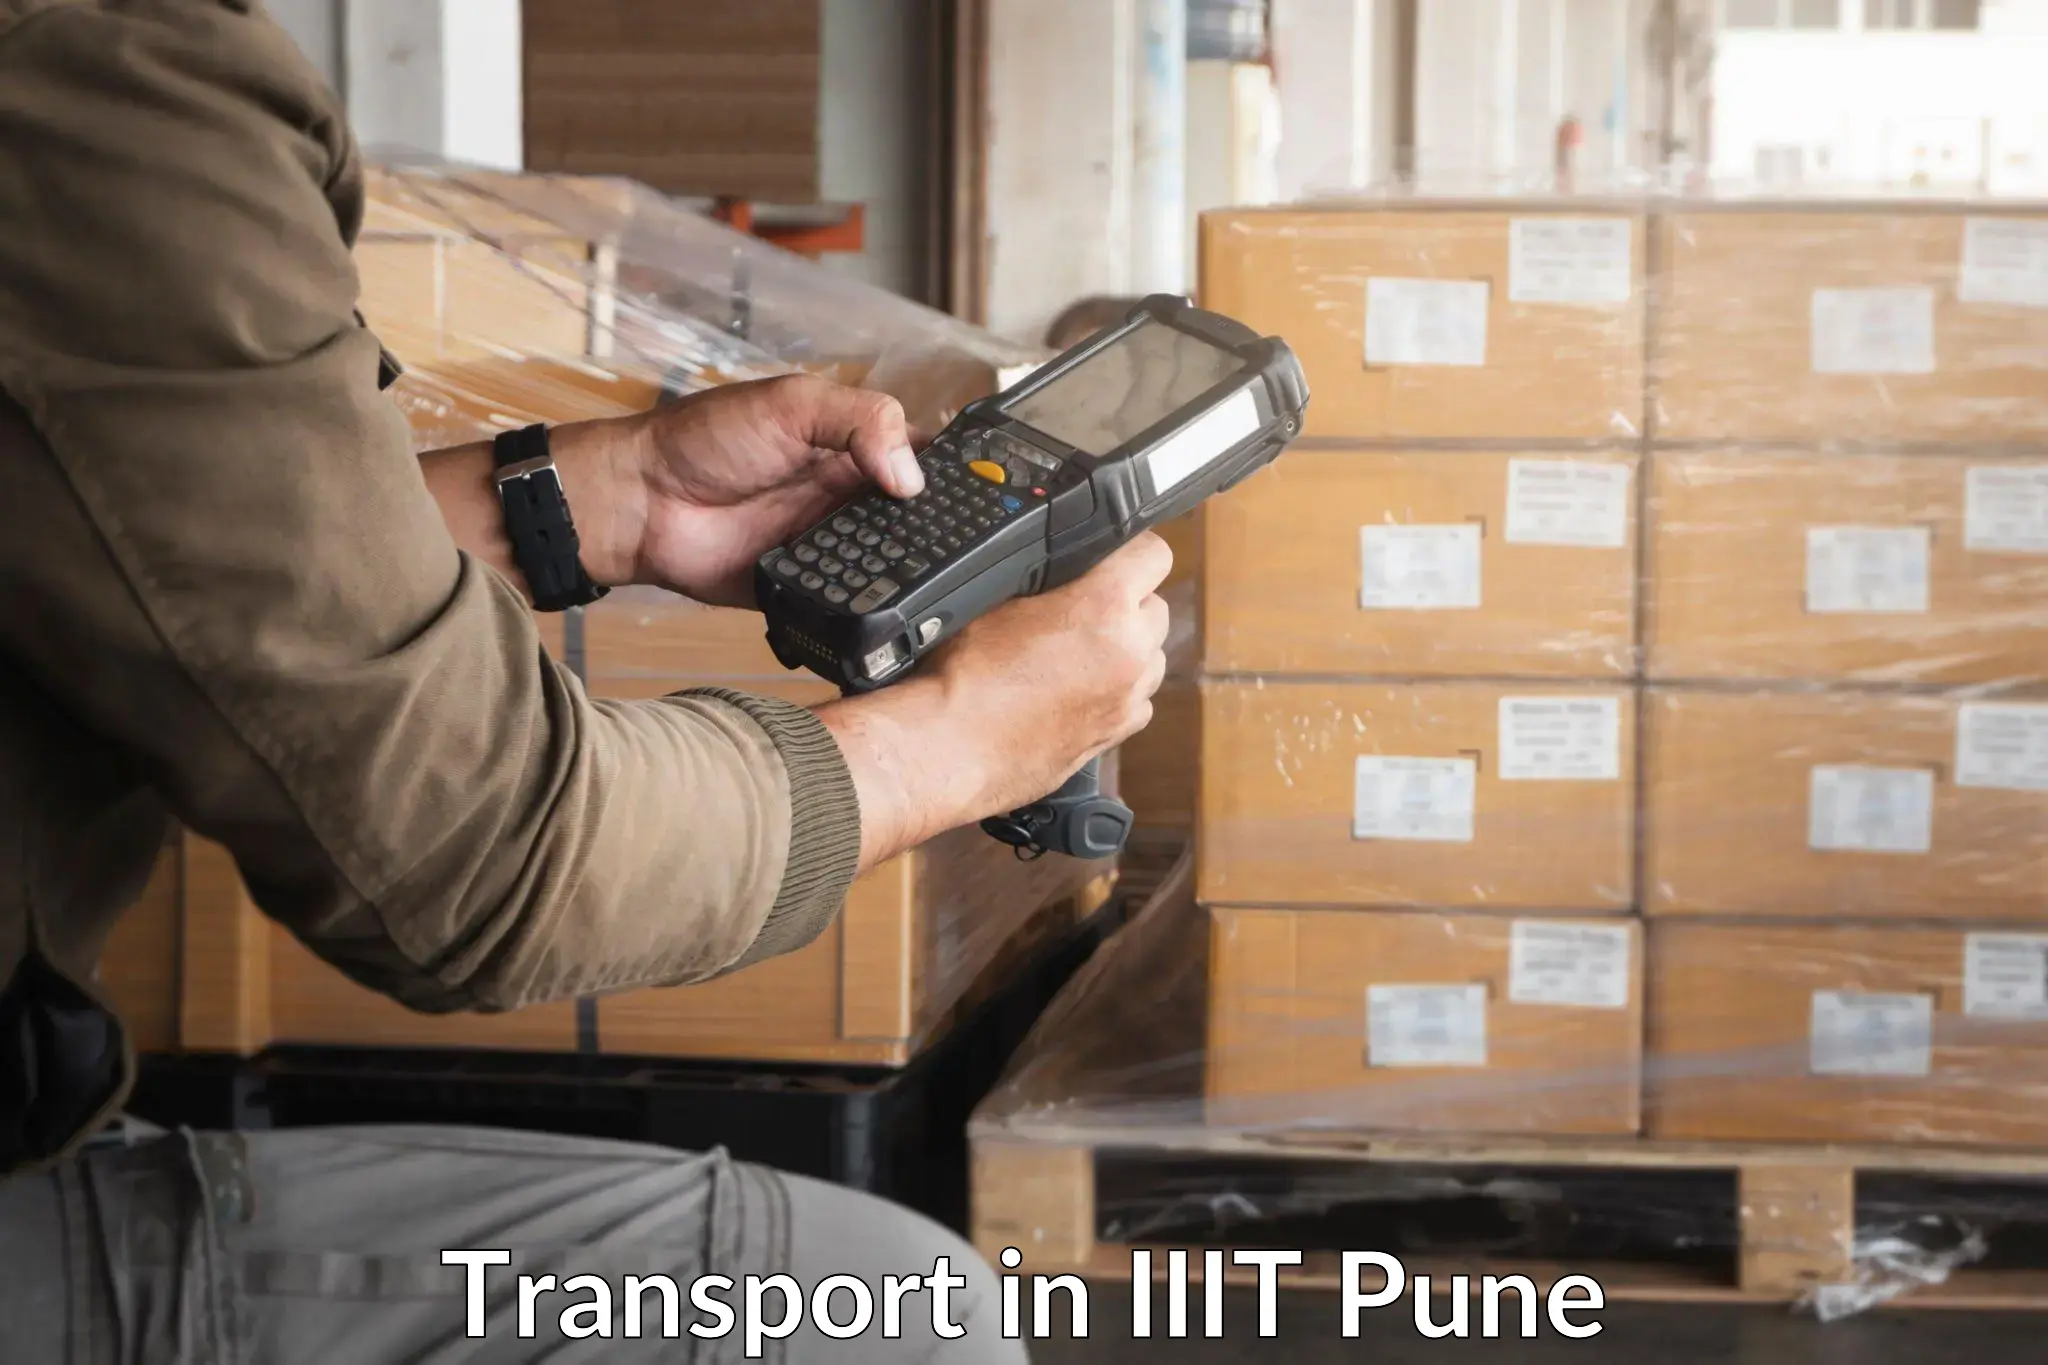 Transport bike from one state to another in IIIT Pune